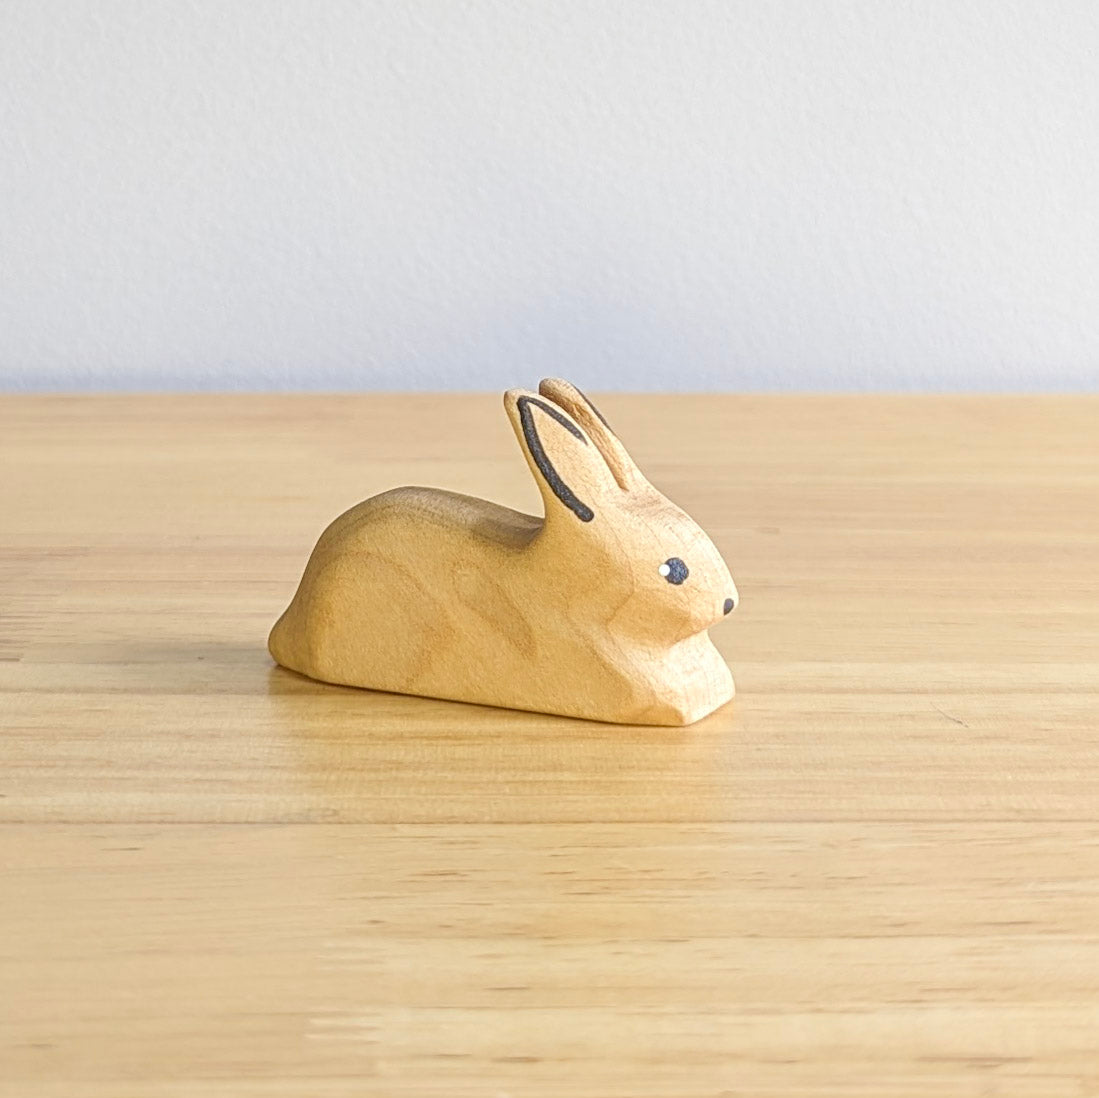 Laying Bunny Rabbit Wooden Toy